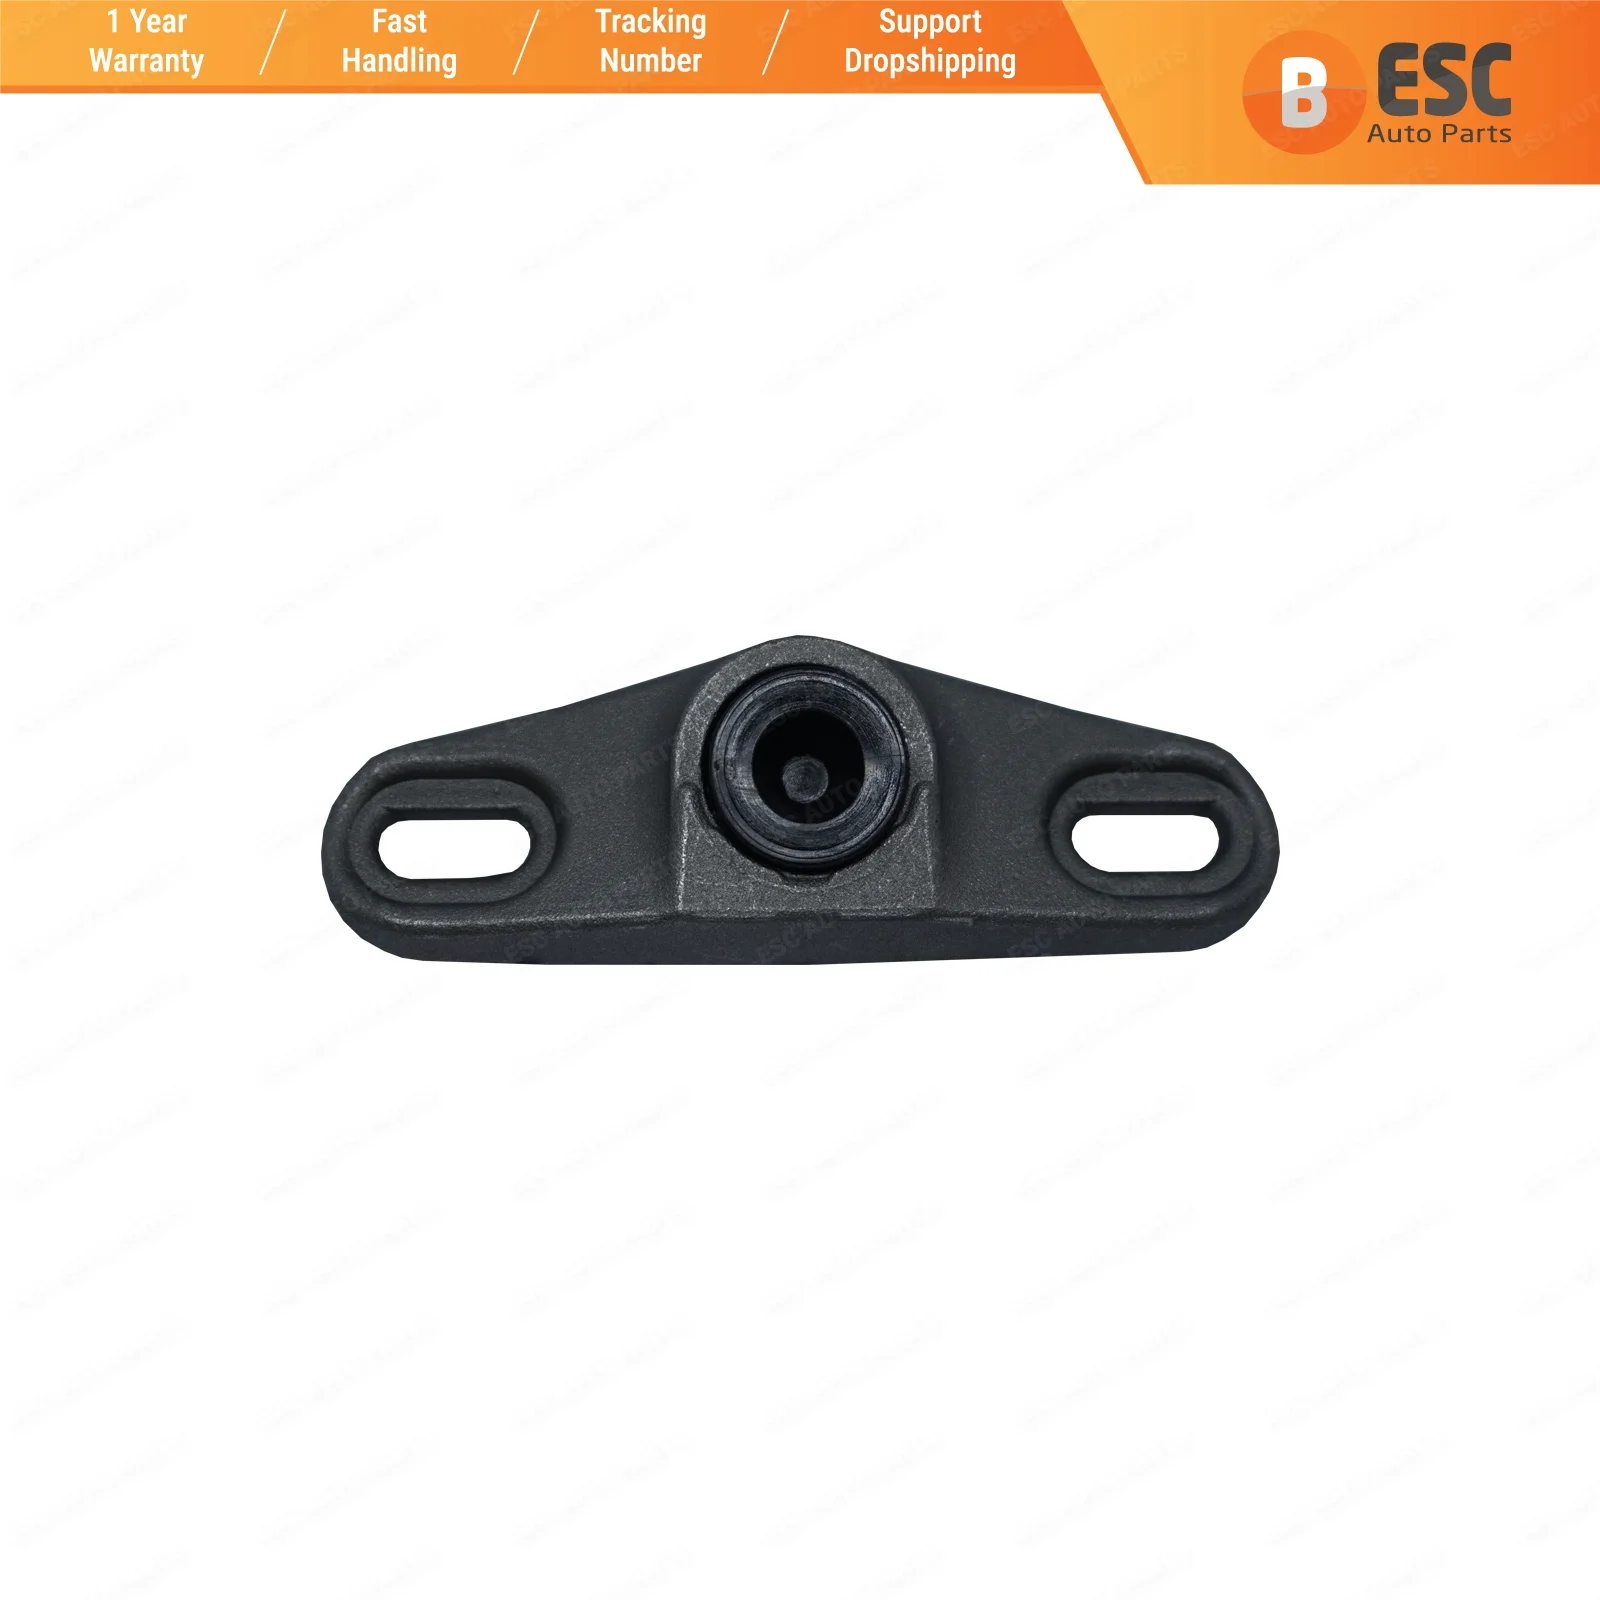 

ESC Auto Parts EDP805 Sliding Door Locator Guide 1358687080 for Ducato Jumper Relay Boxer Daily Fast Shipment Ship From Turkey